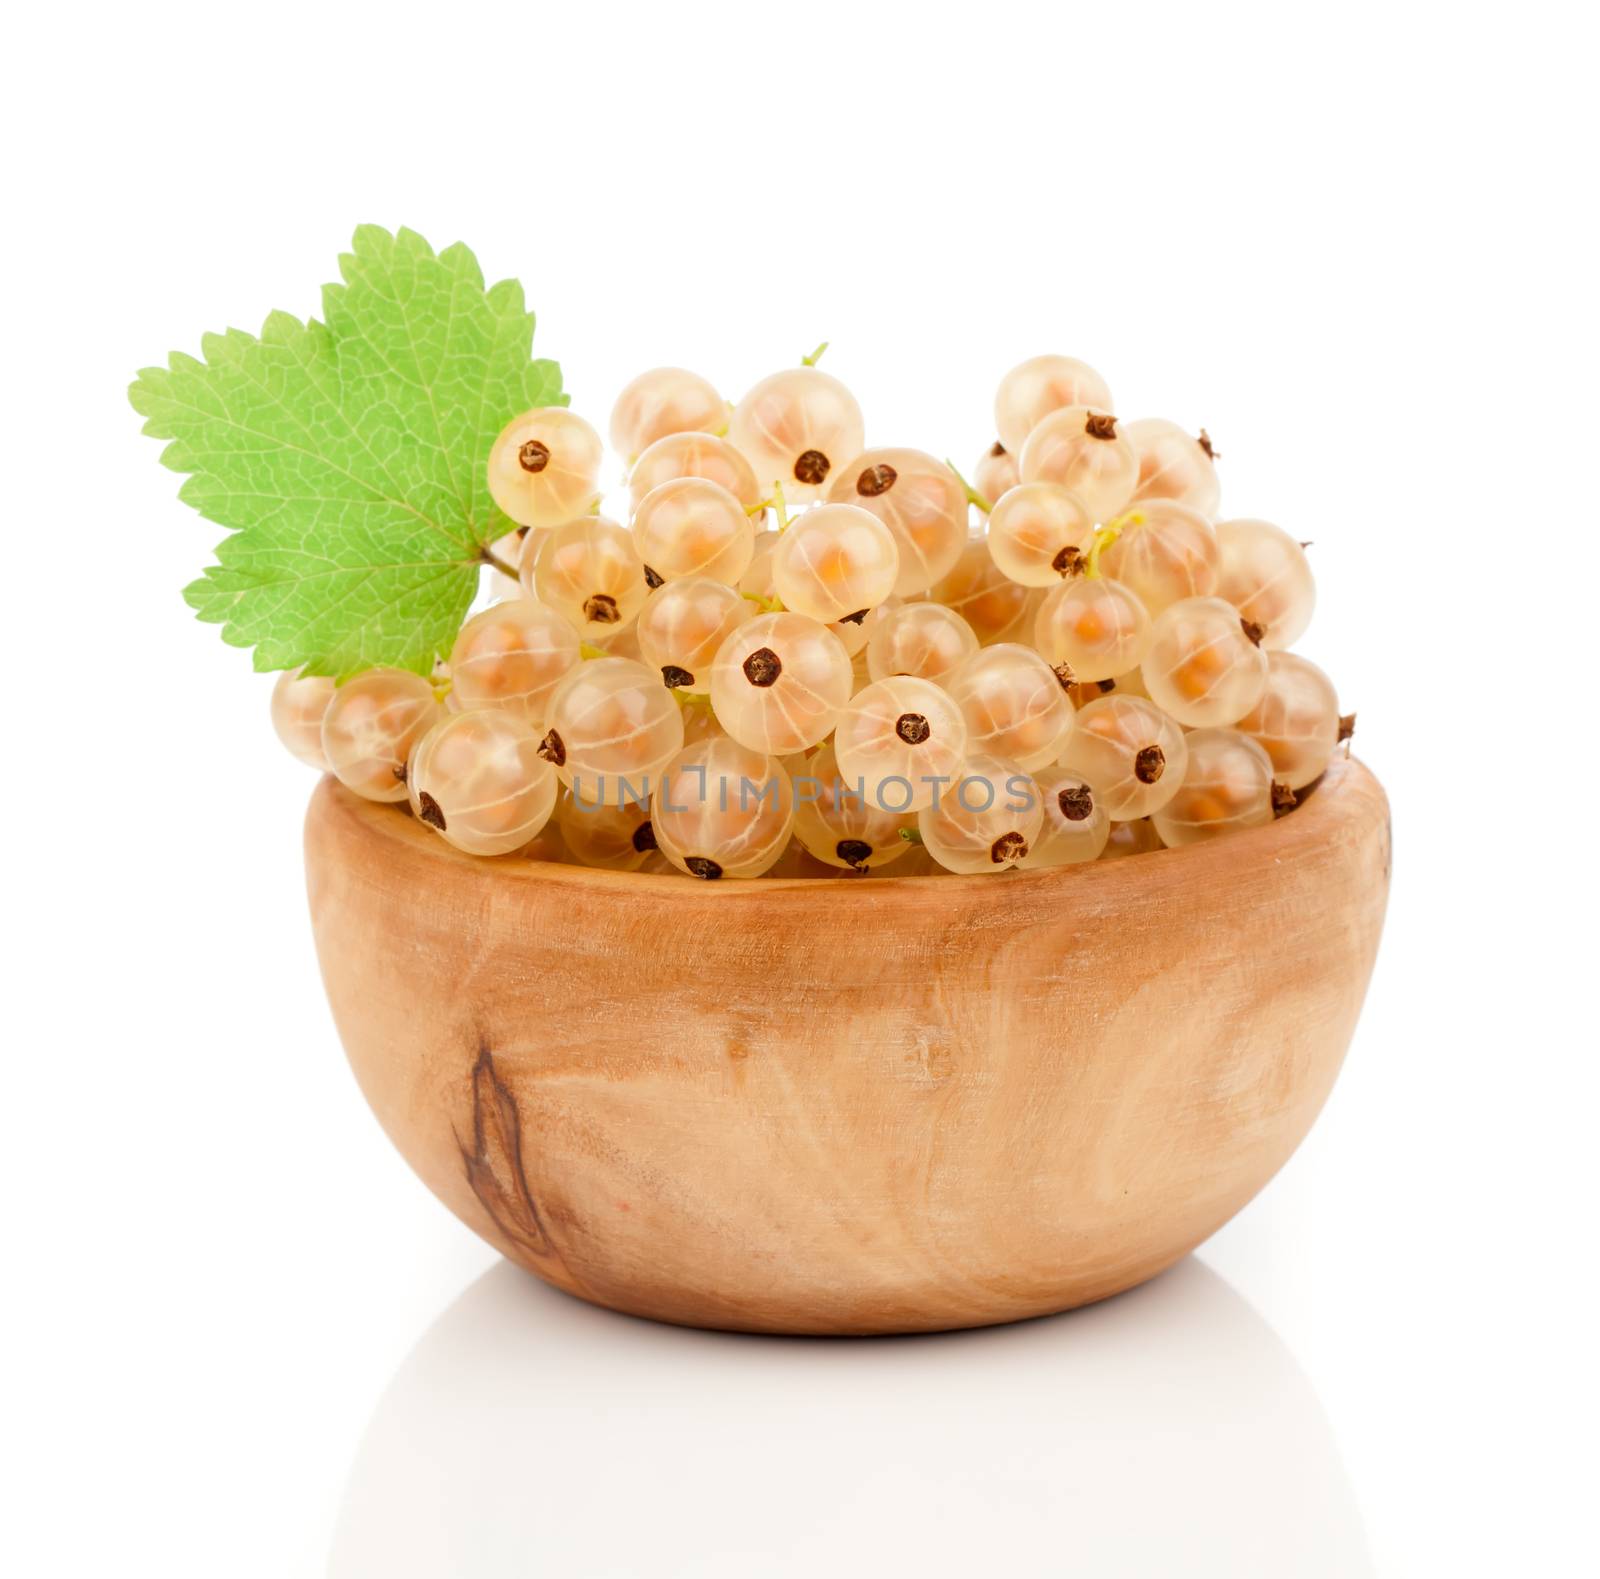 white currant fruit in wood bowls, over white background. by motorolka